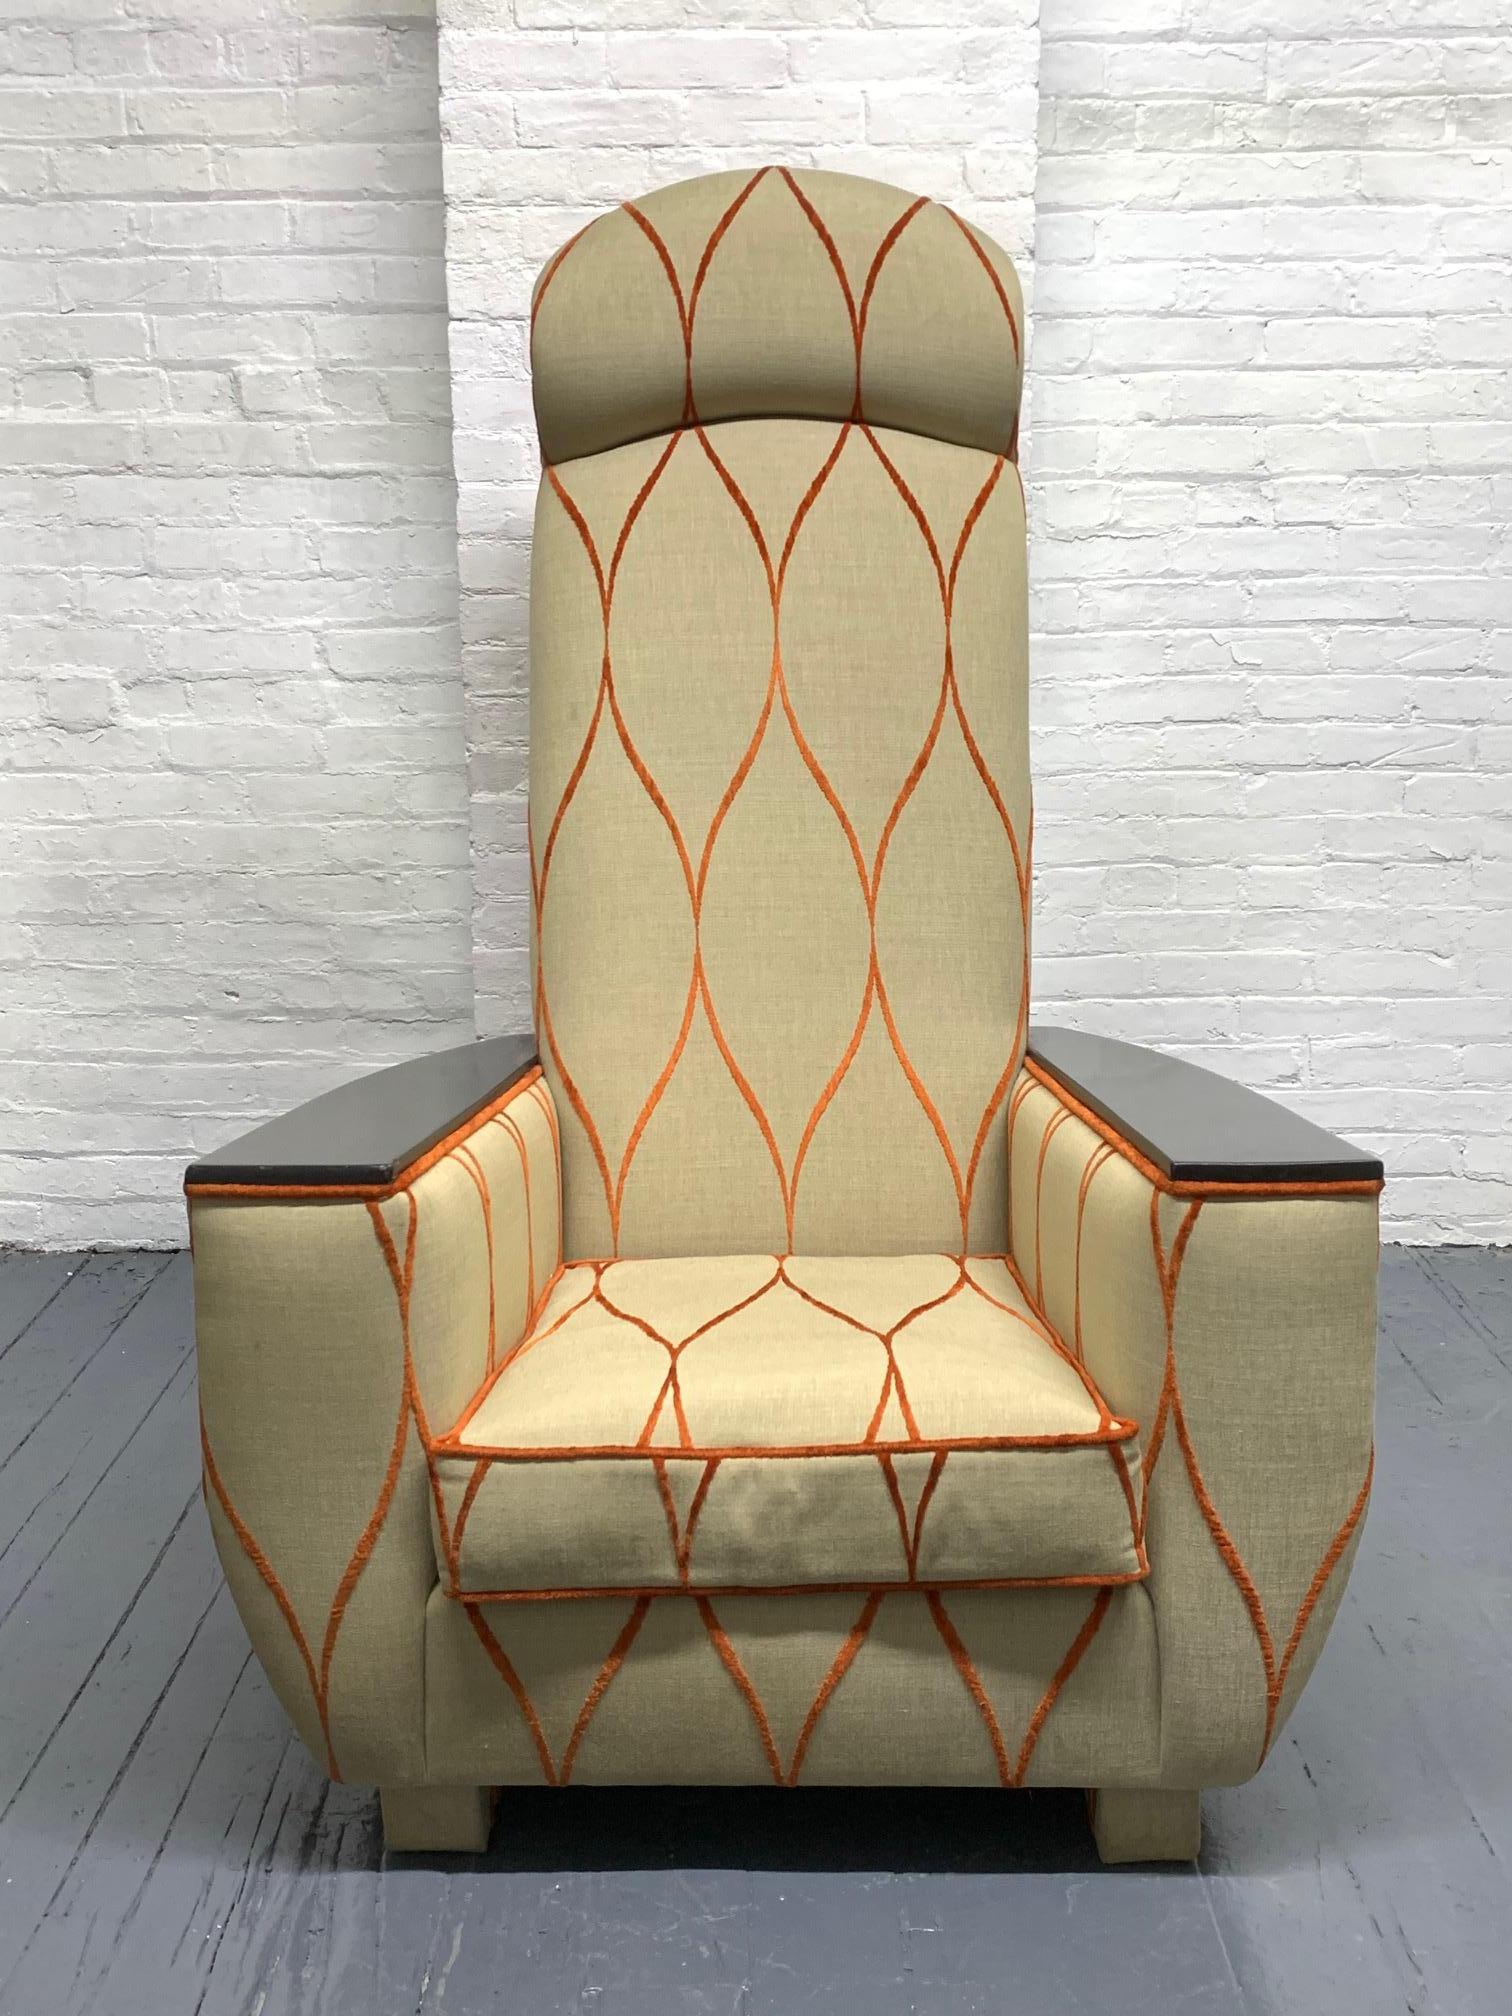 Decorative modern tall back lounge or armchair. The back of the chair is upholstered in it's original orange velvet fabric. Has solid wooden arms and the legs are also upholstered.